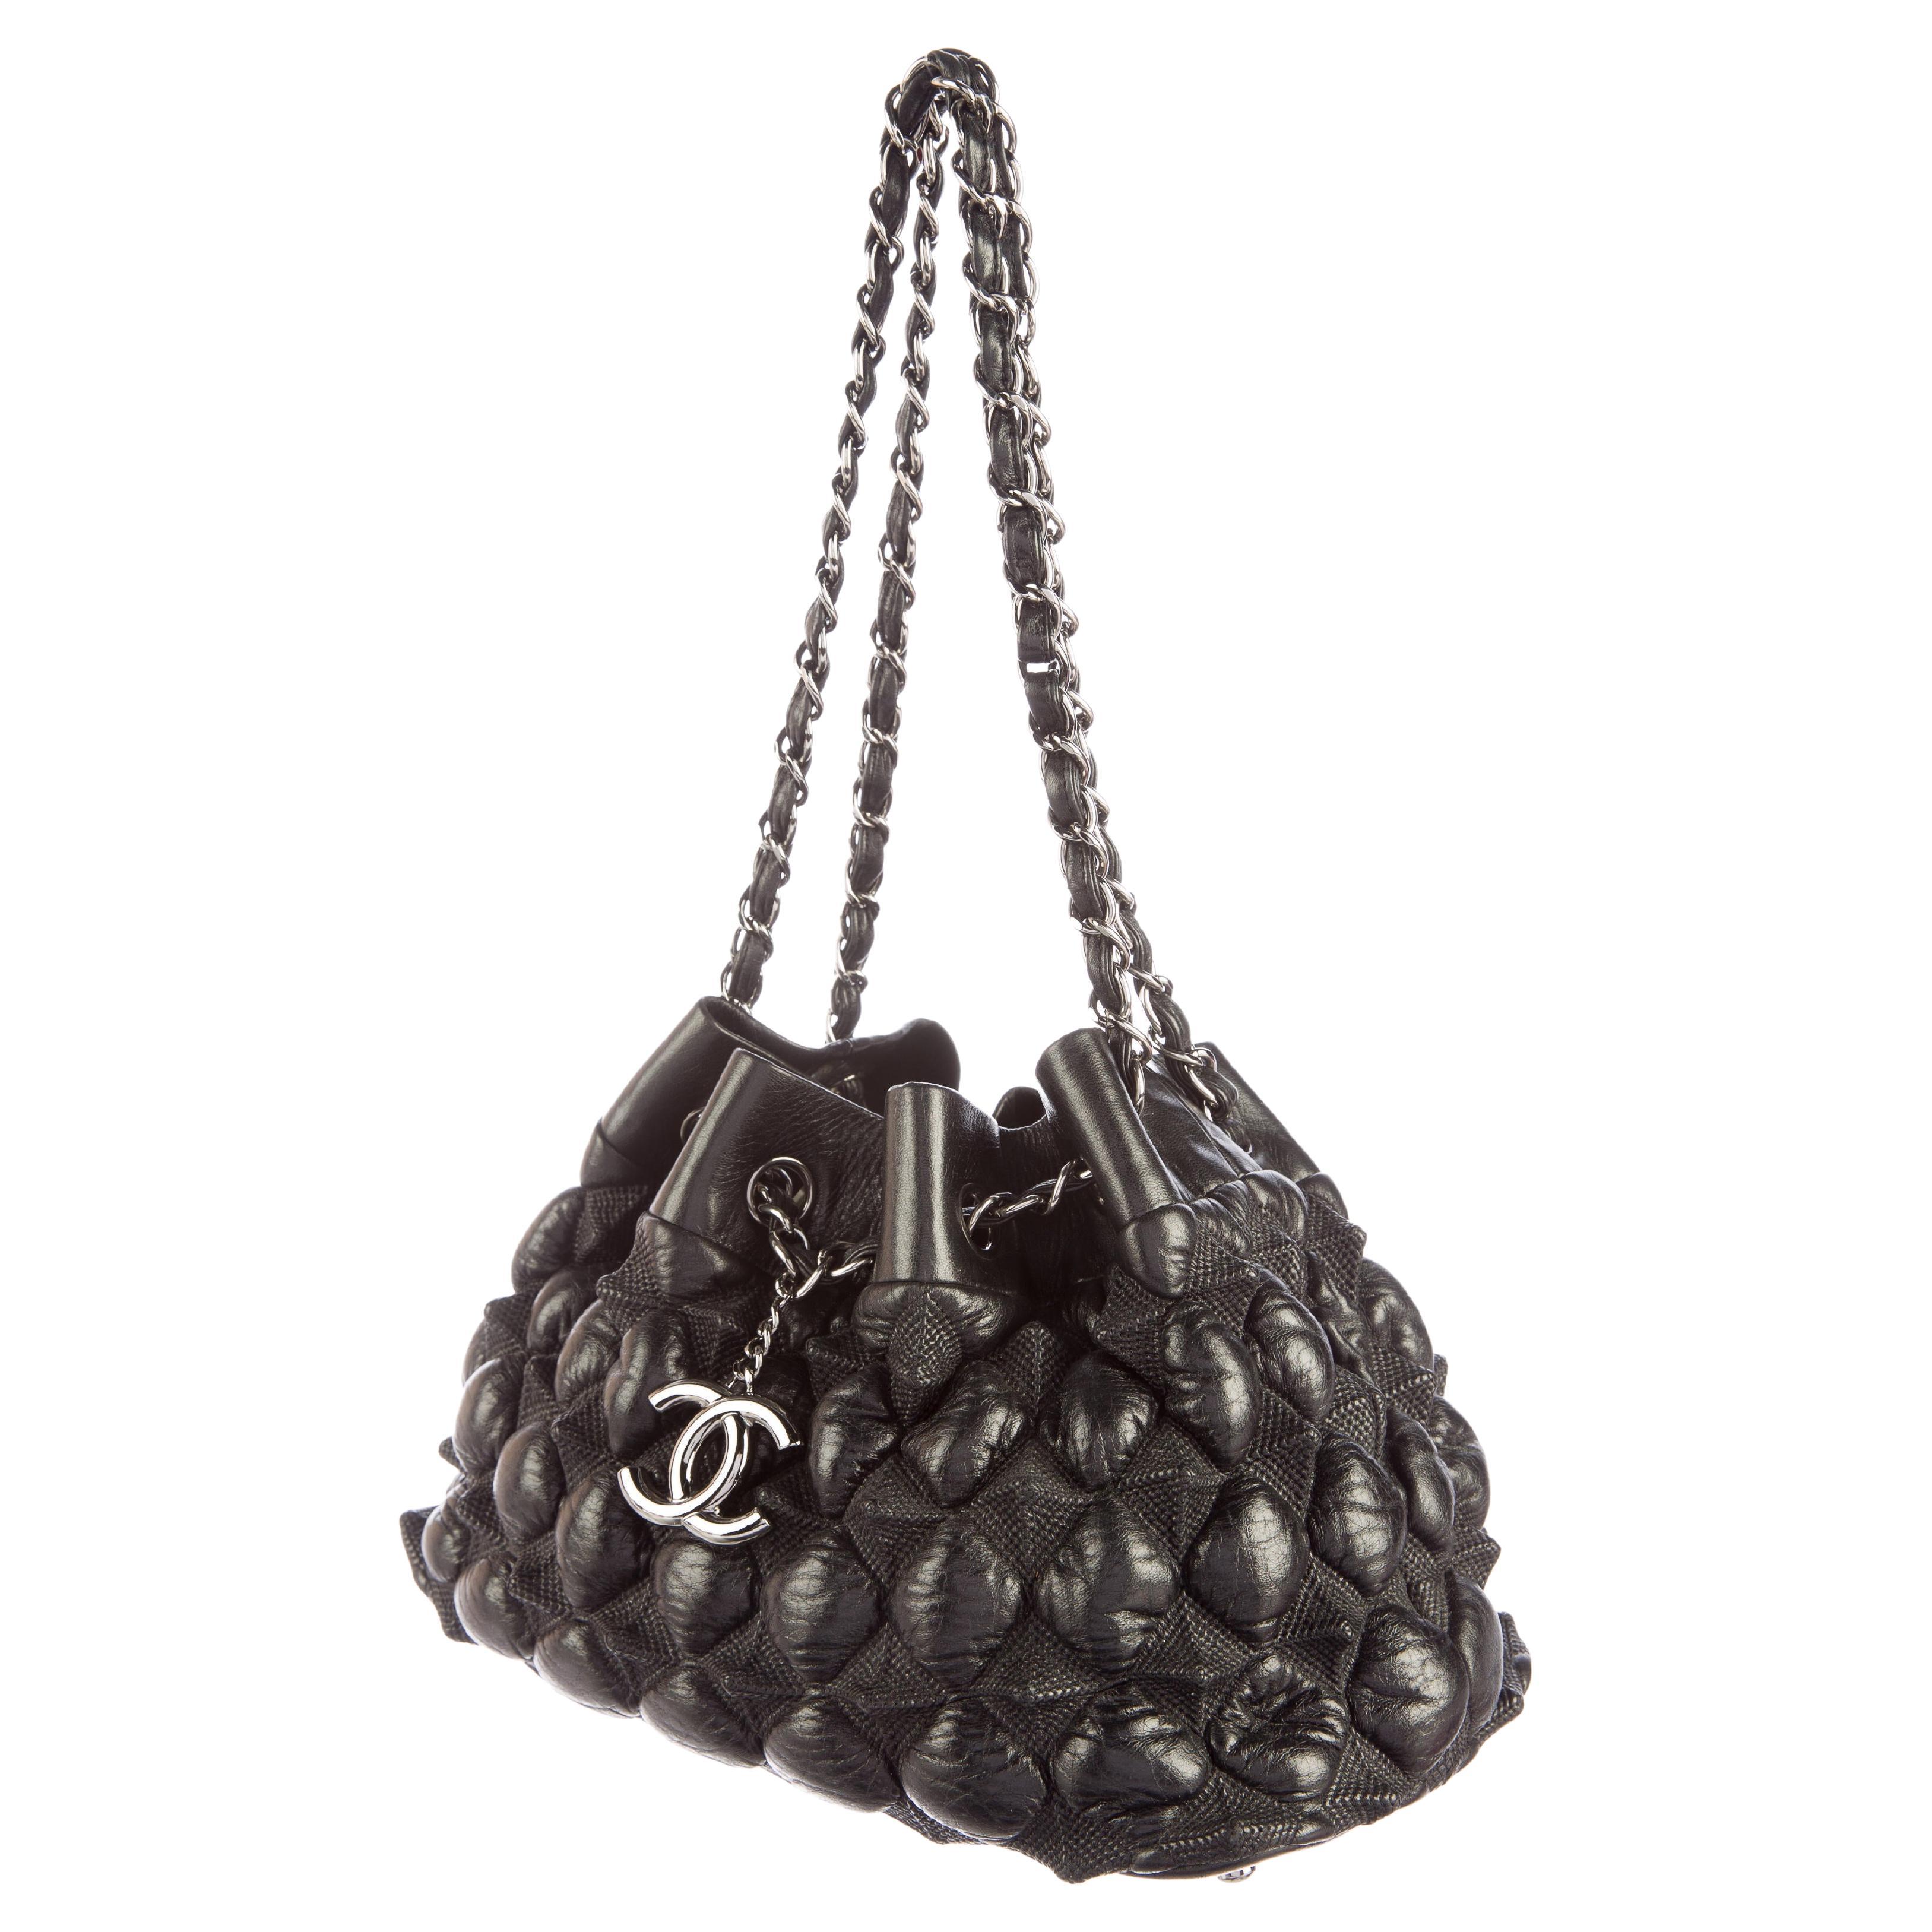 Chanel Rare Metiers d'Art Raised Geometric Pyramid Diamond Quilted Shoulder Bag

2009 Métiers d'Art Collection

Gunmetal hardware
Classic interwoven leather chain 
Drawstring closure
Raised 3D geometric quilted leather pyramid and diamond bubble